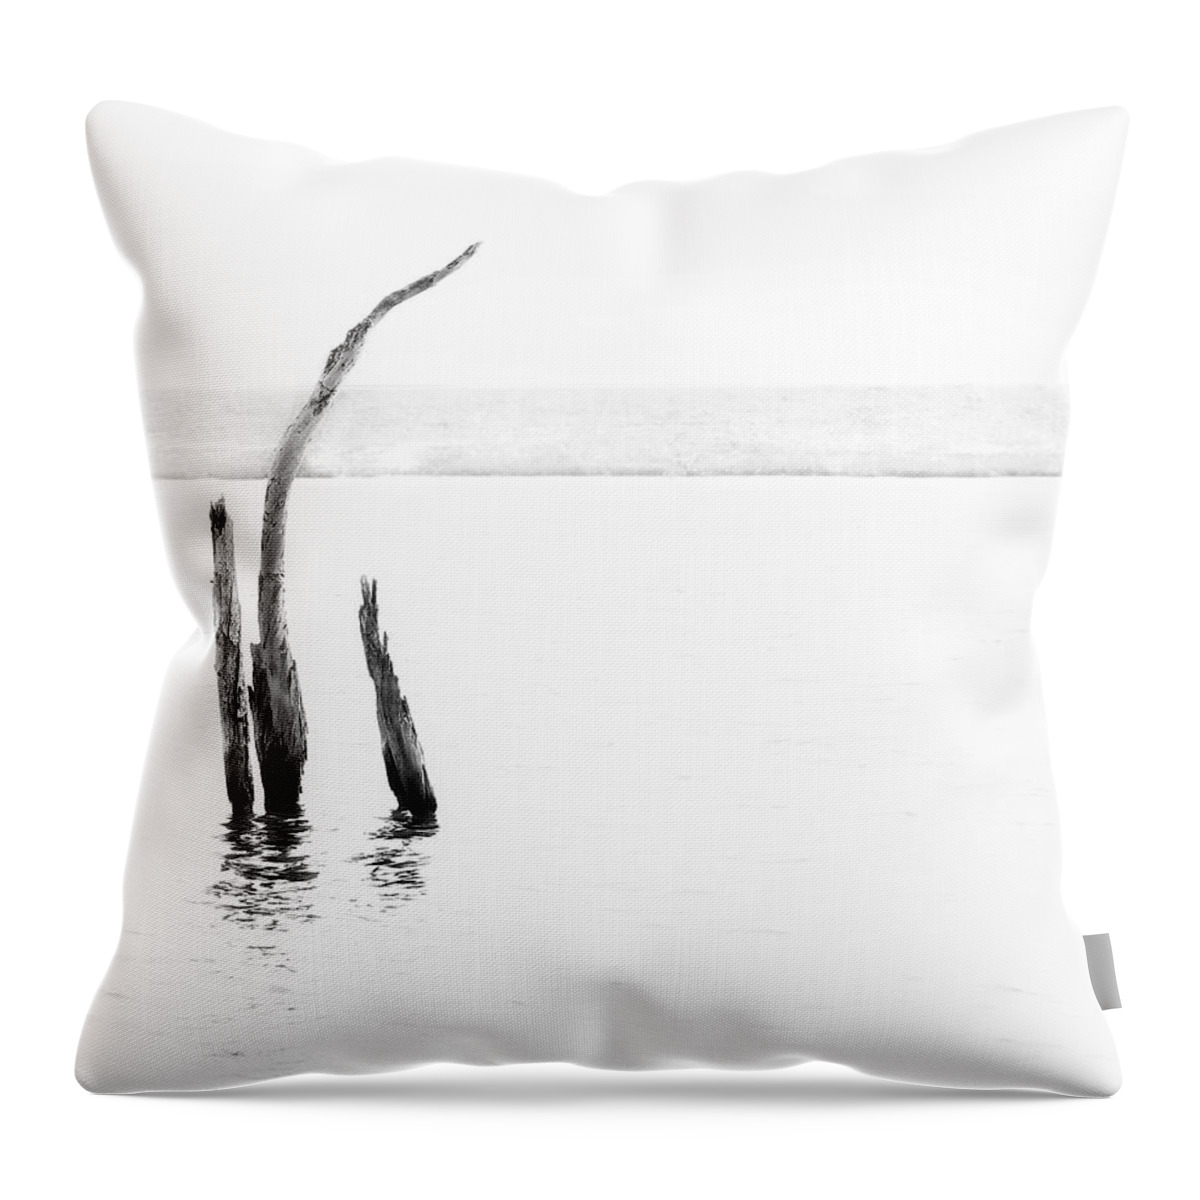 Denise Dube Throw Pillow featuring the photograph Isolation by Denise Dube